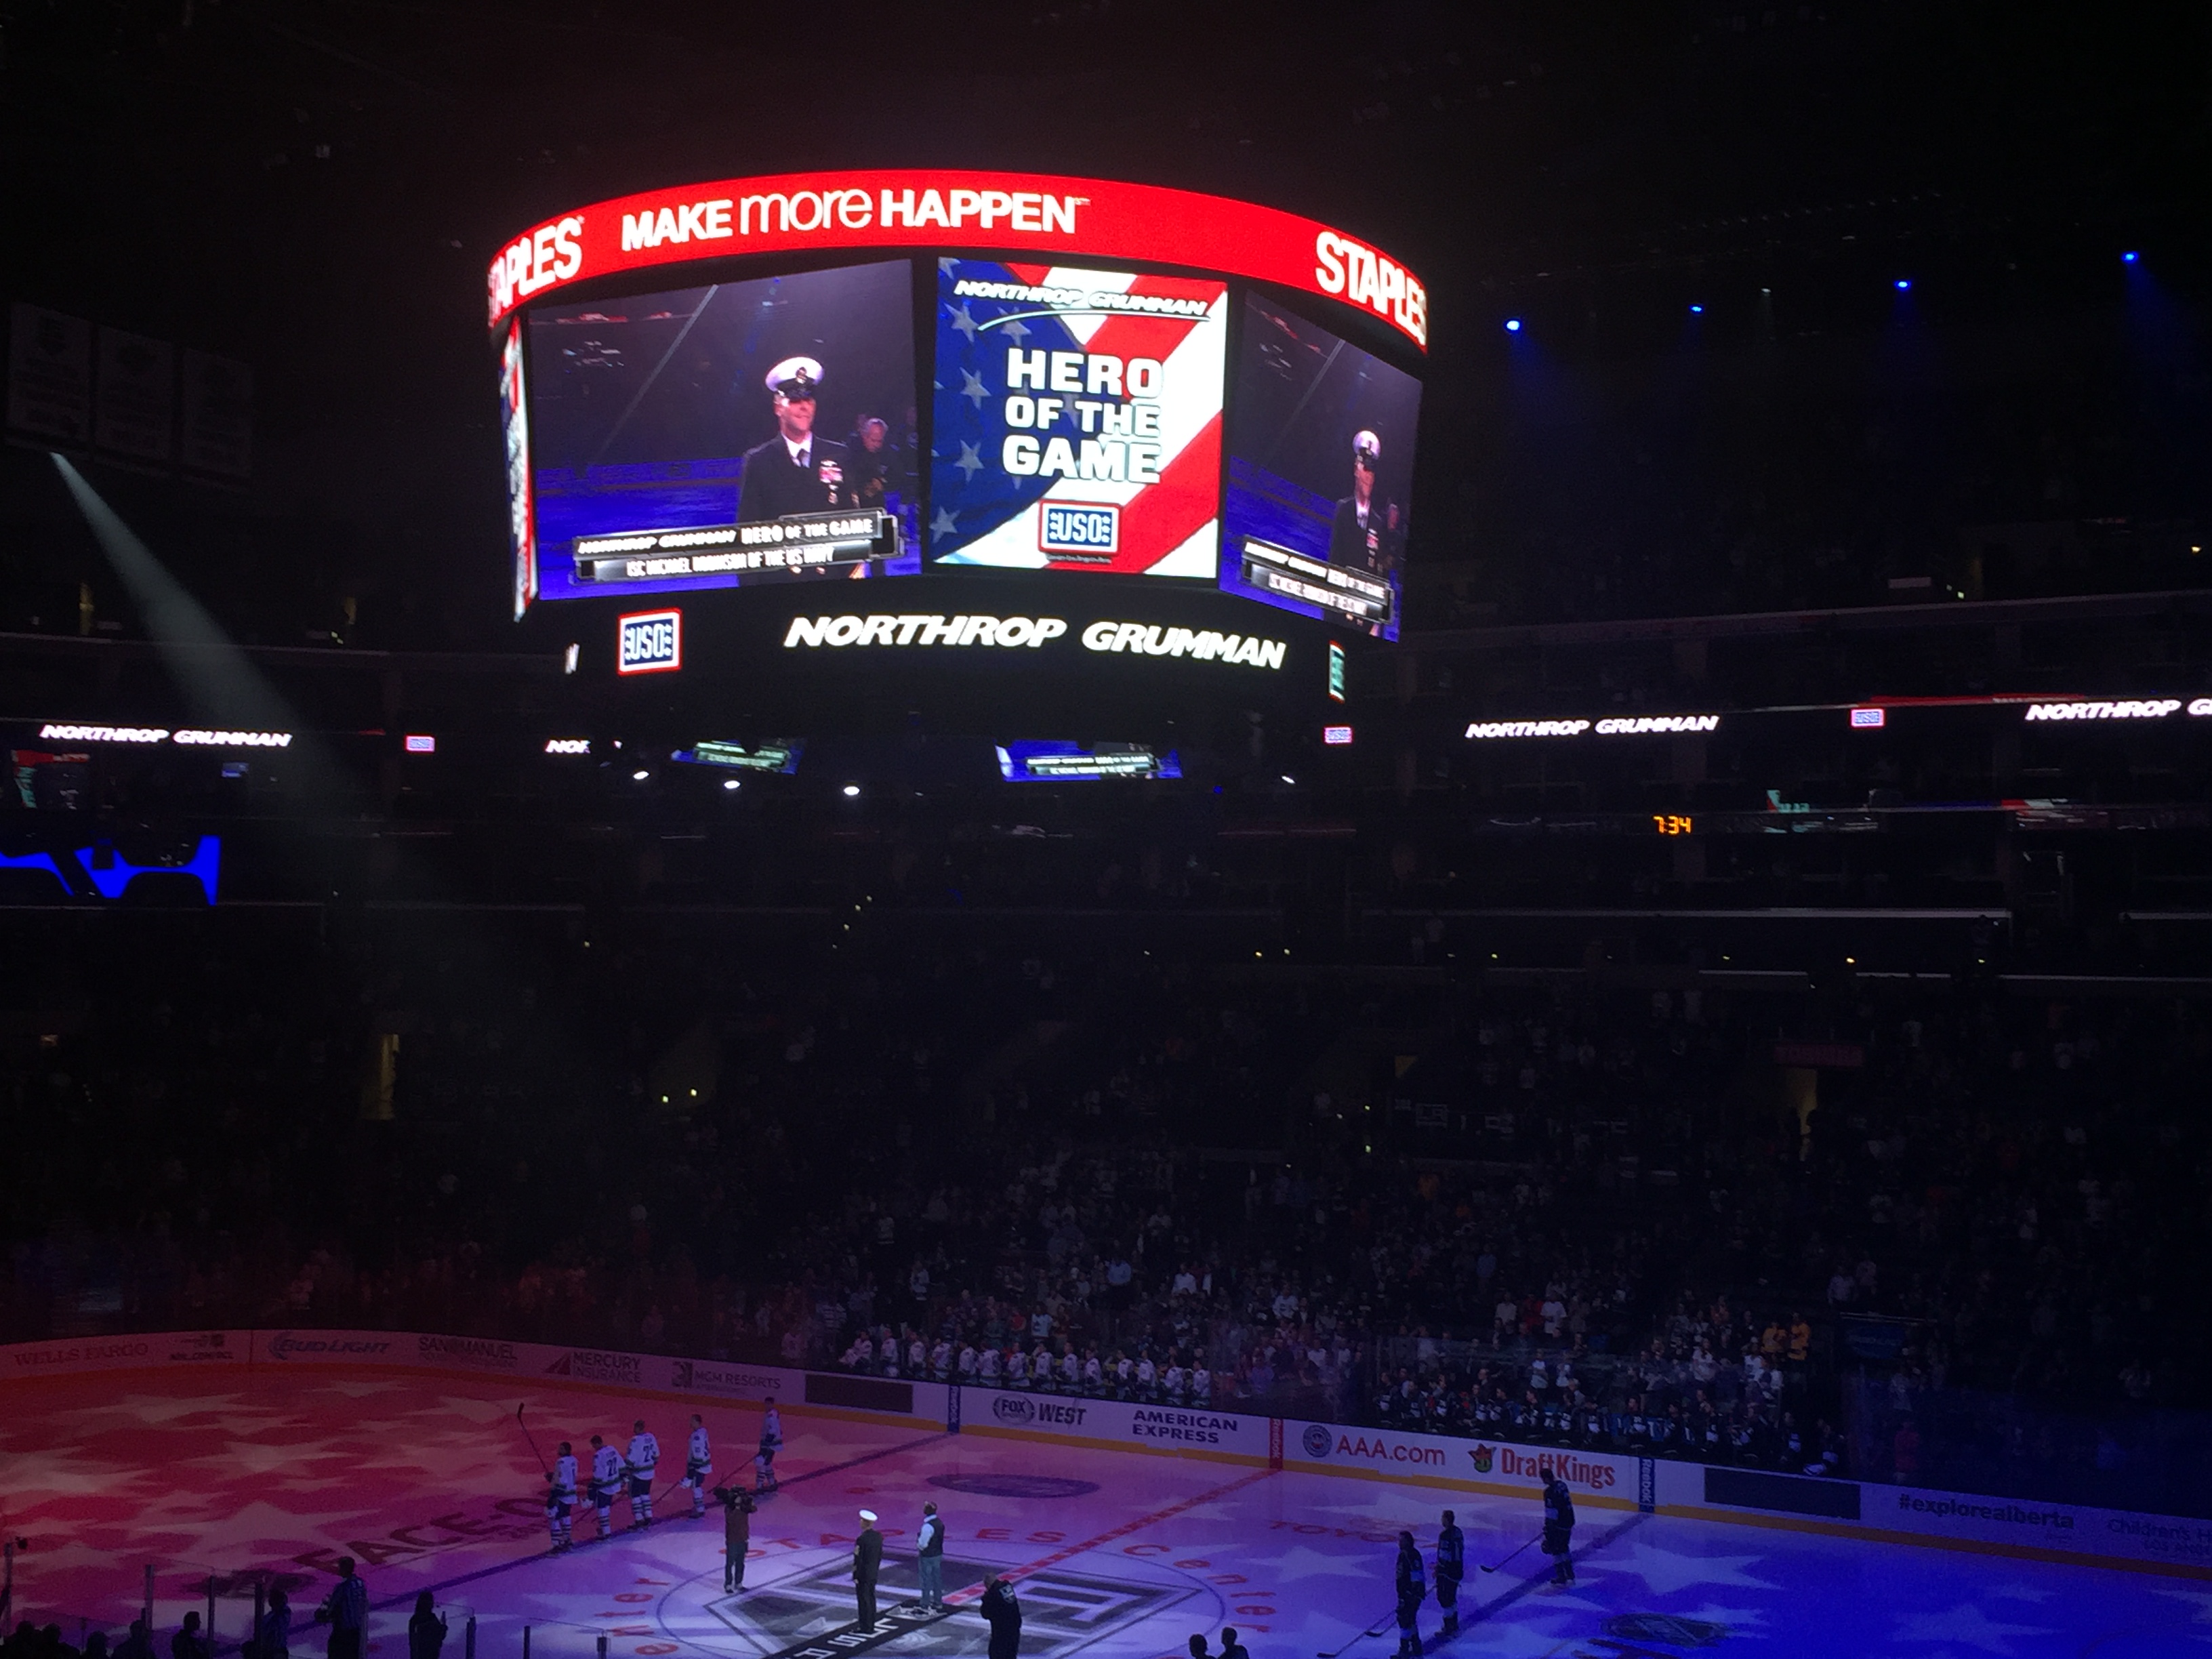 Hero of the game- Honouring USA service men and women